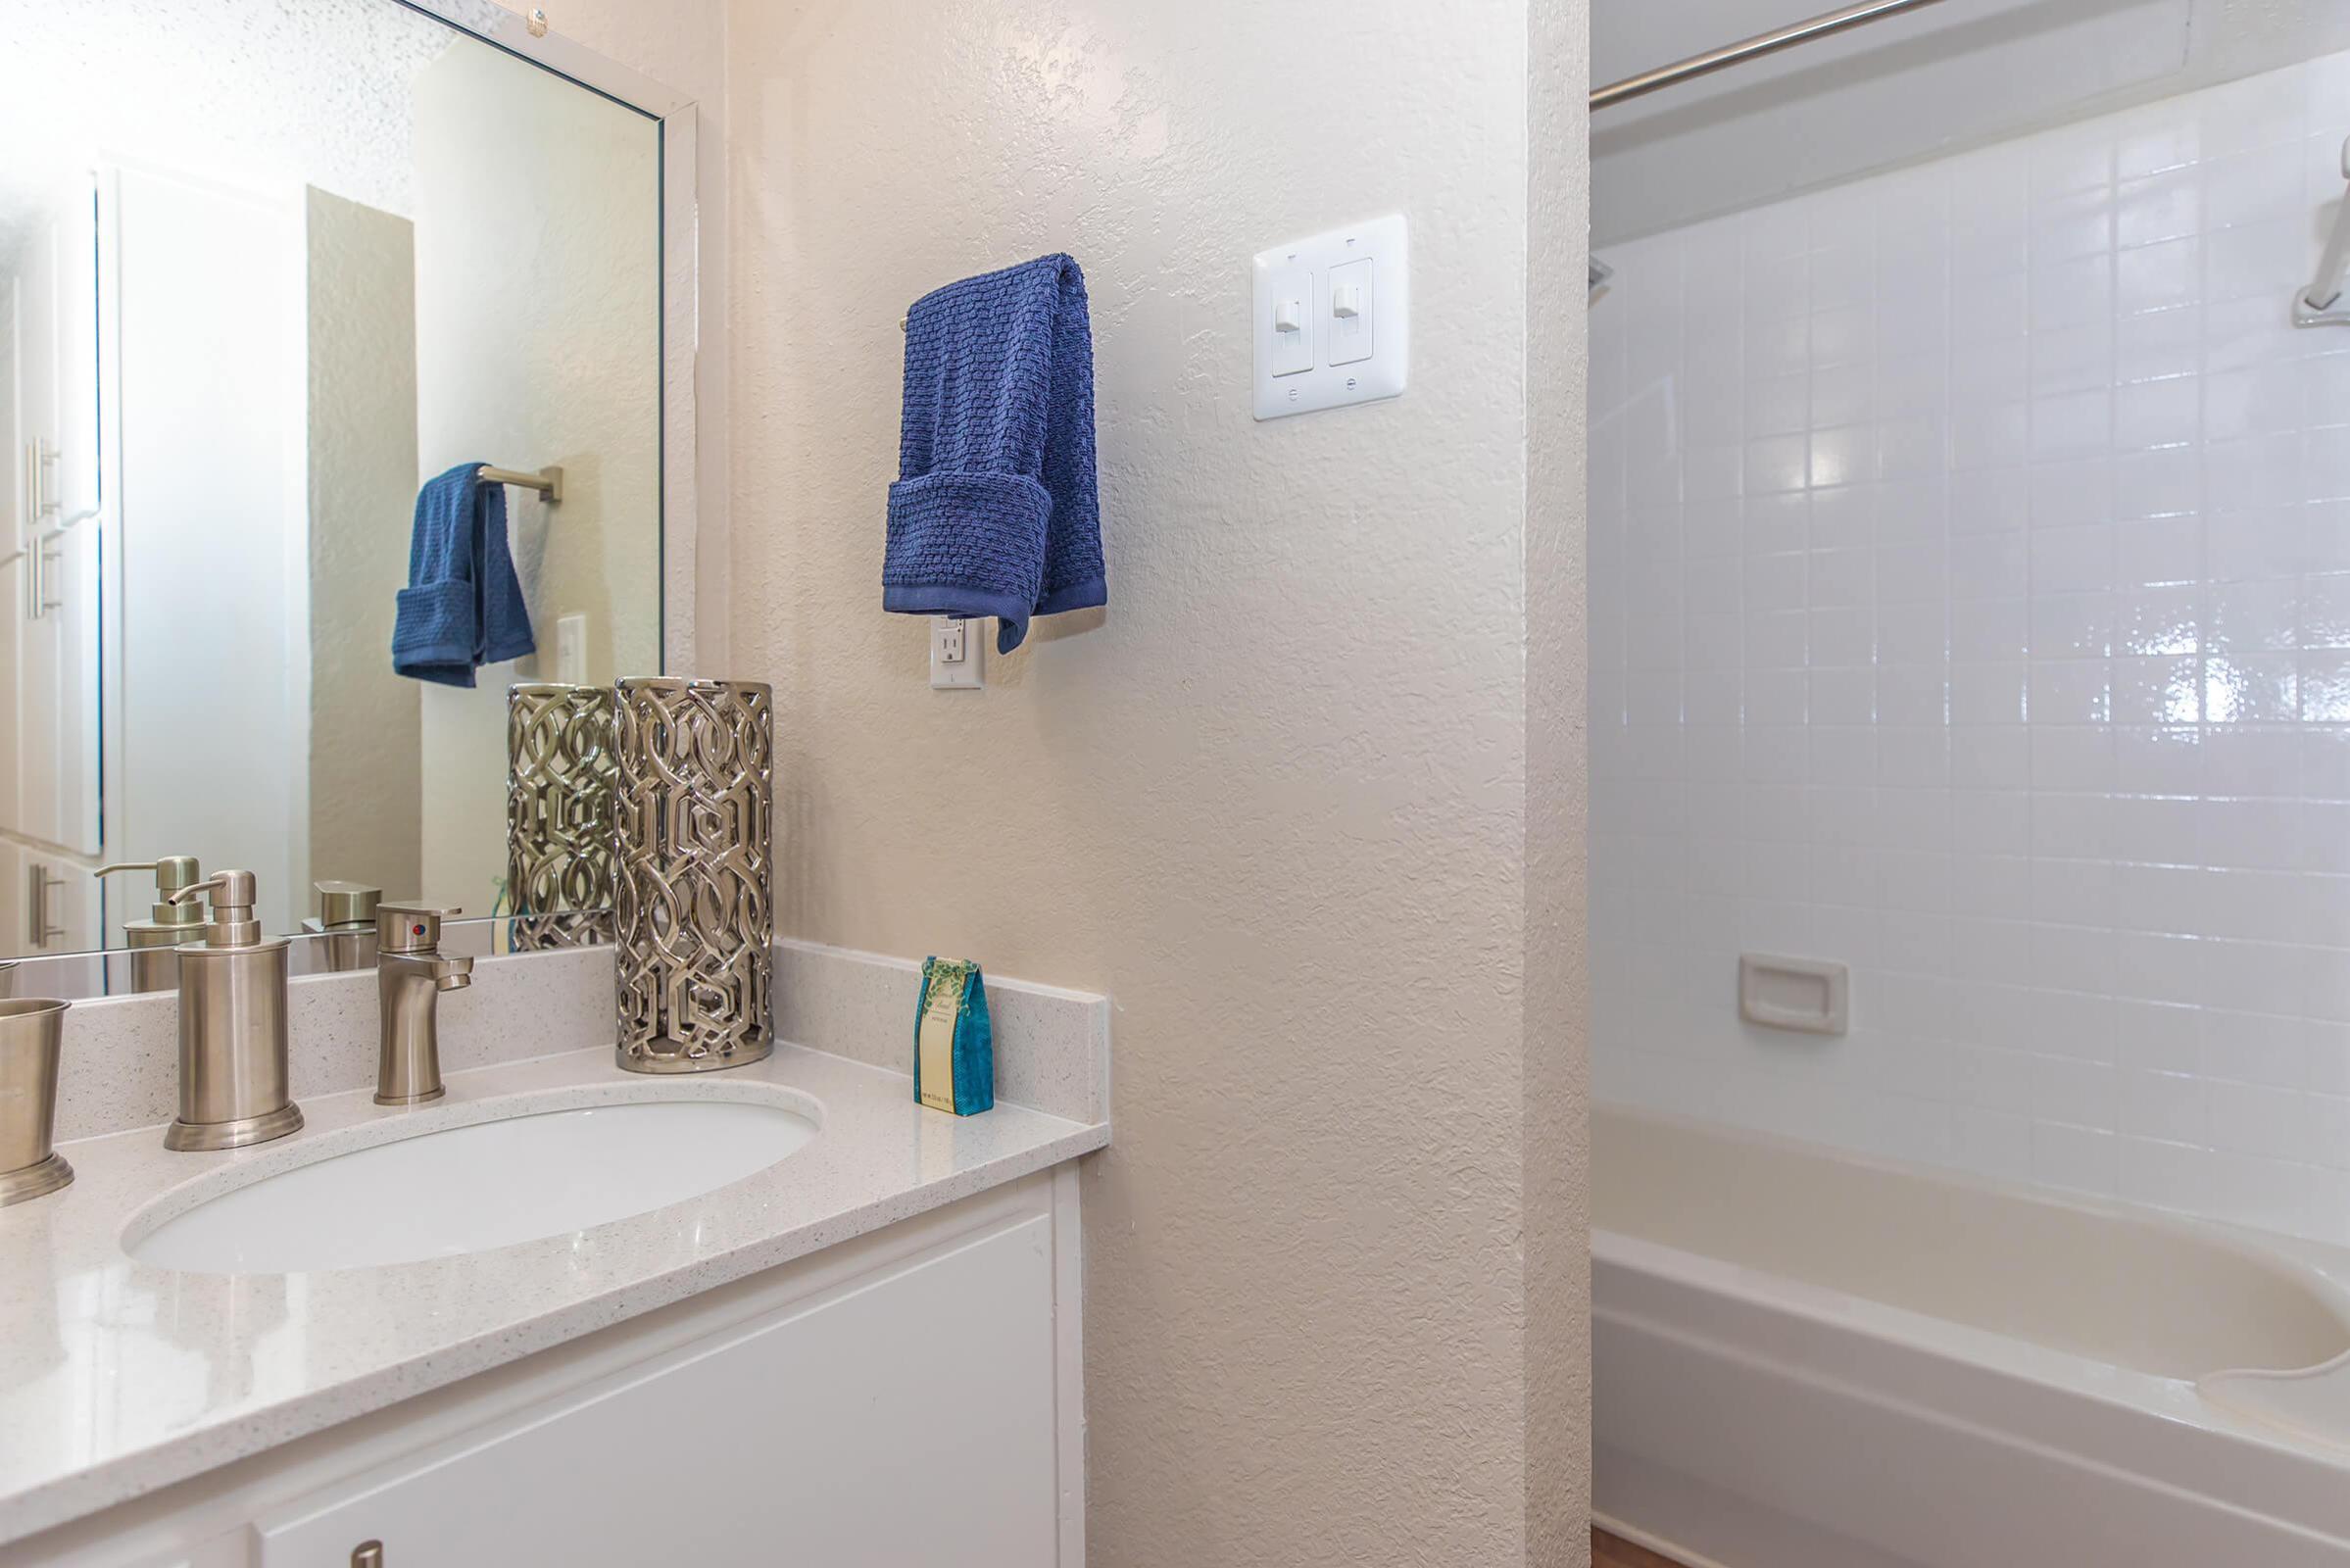 A bathroom with accessories on the vanity and a separated shower at Rise Oak Creek.